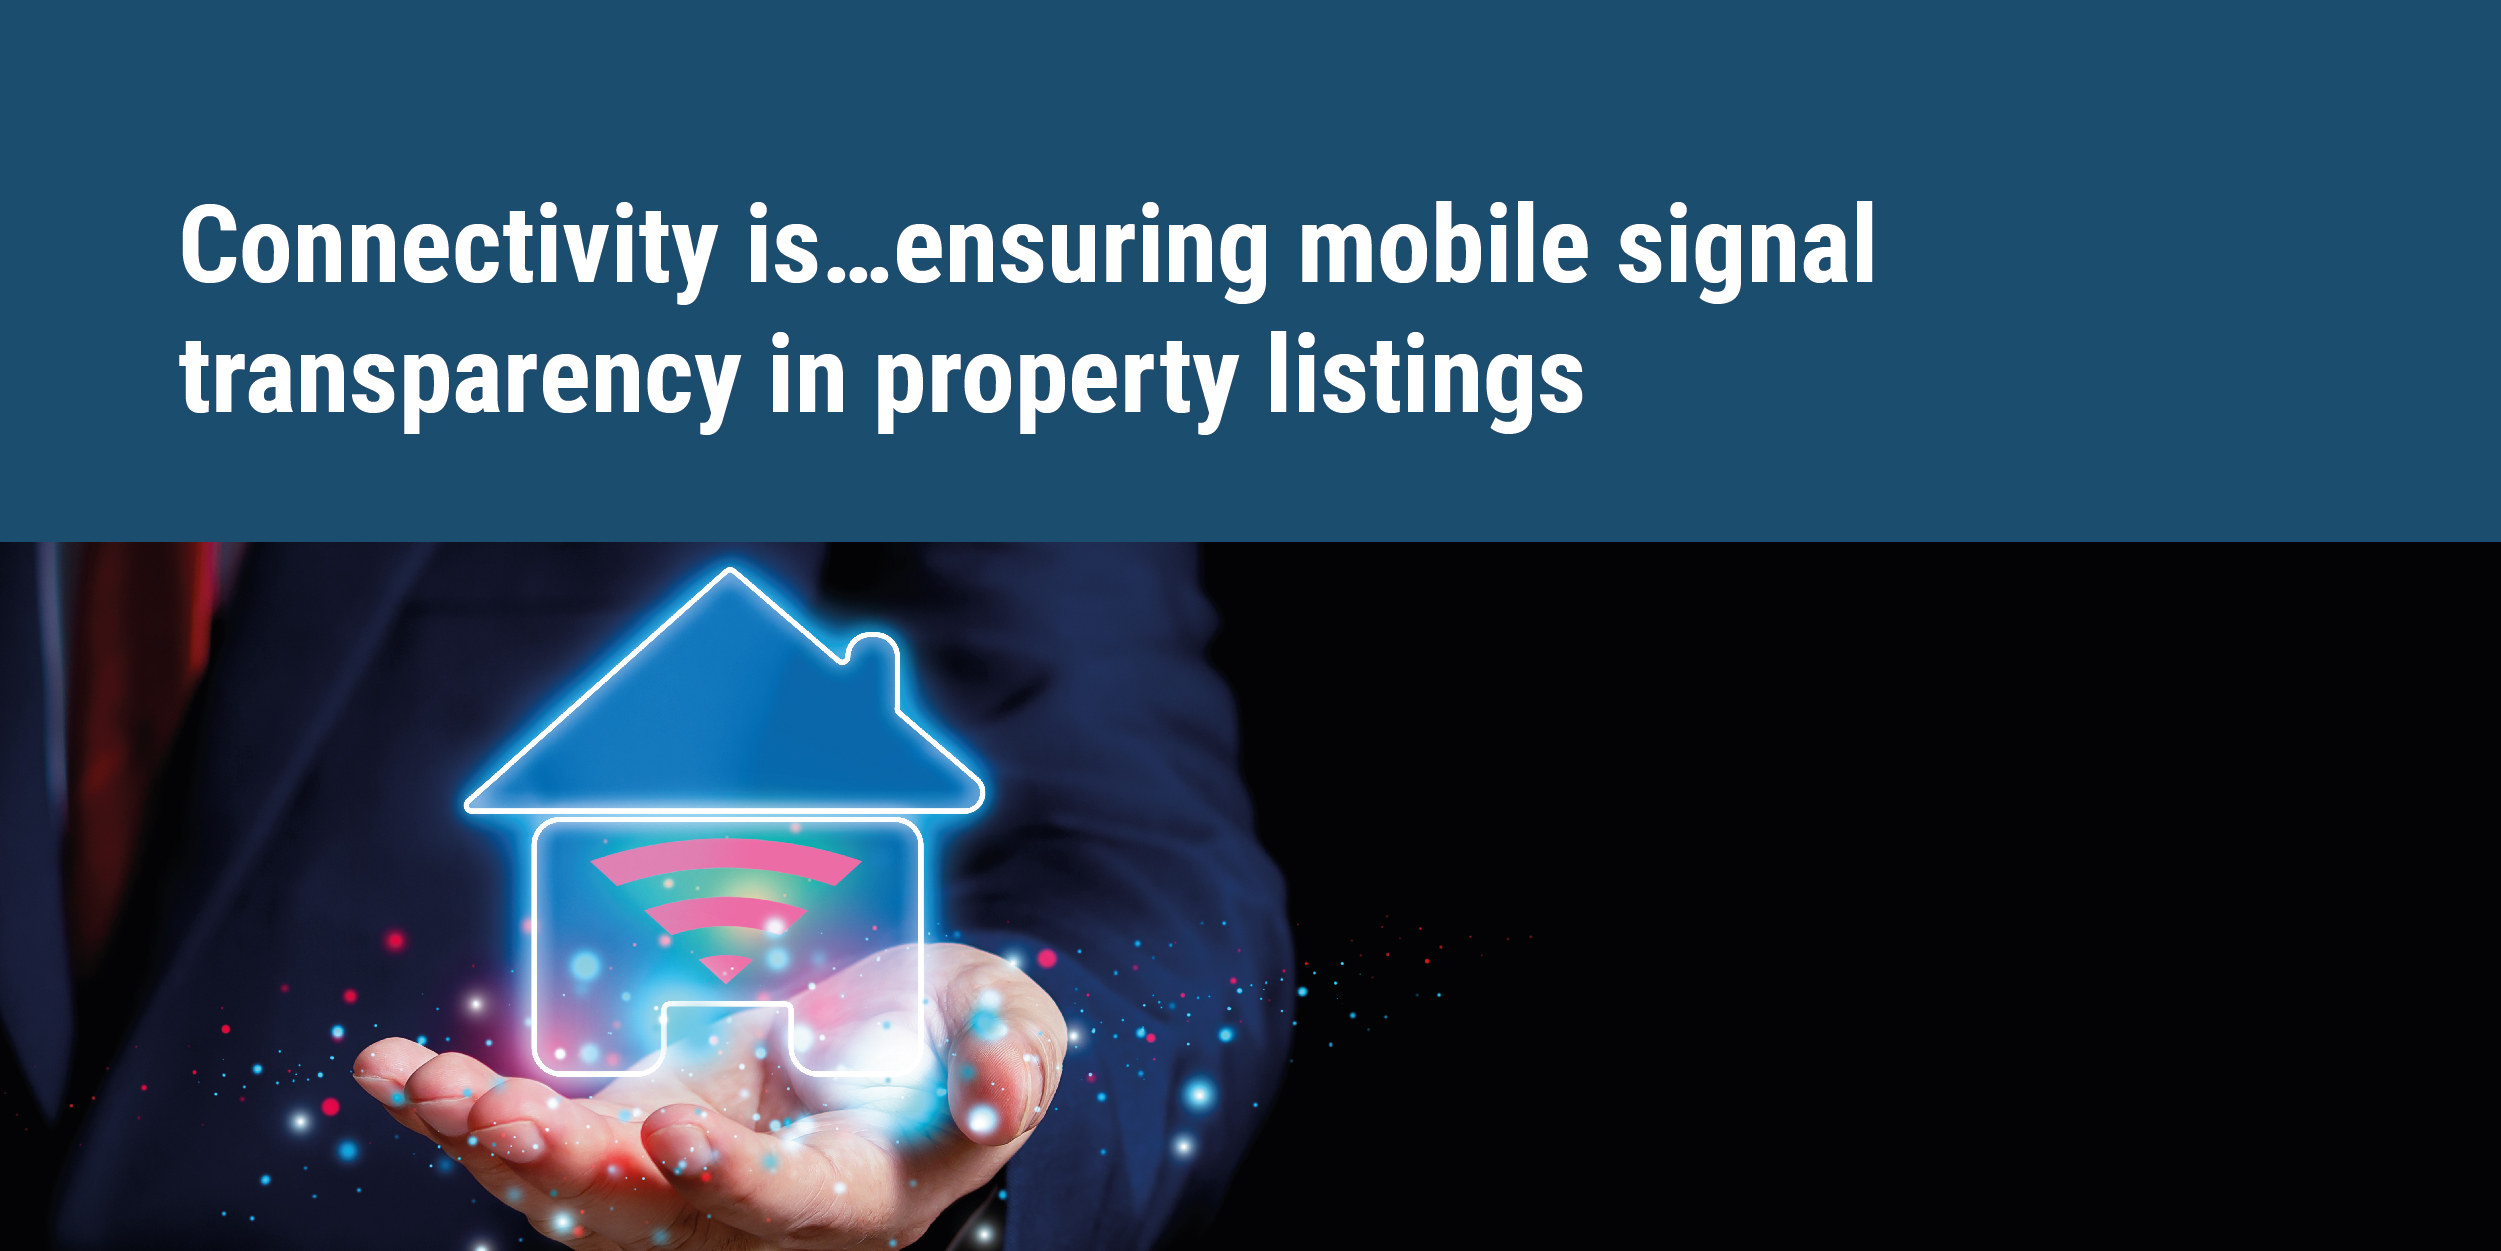 Ensuring mobile signal transparency in property listings